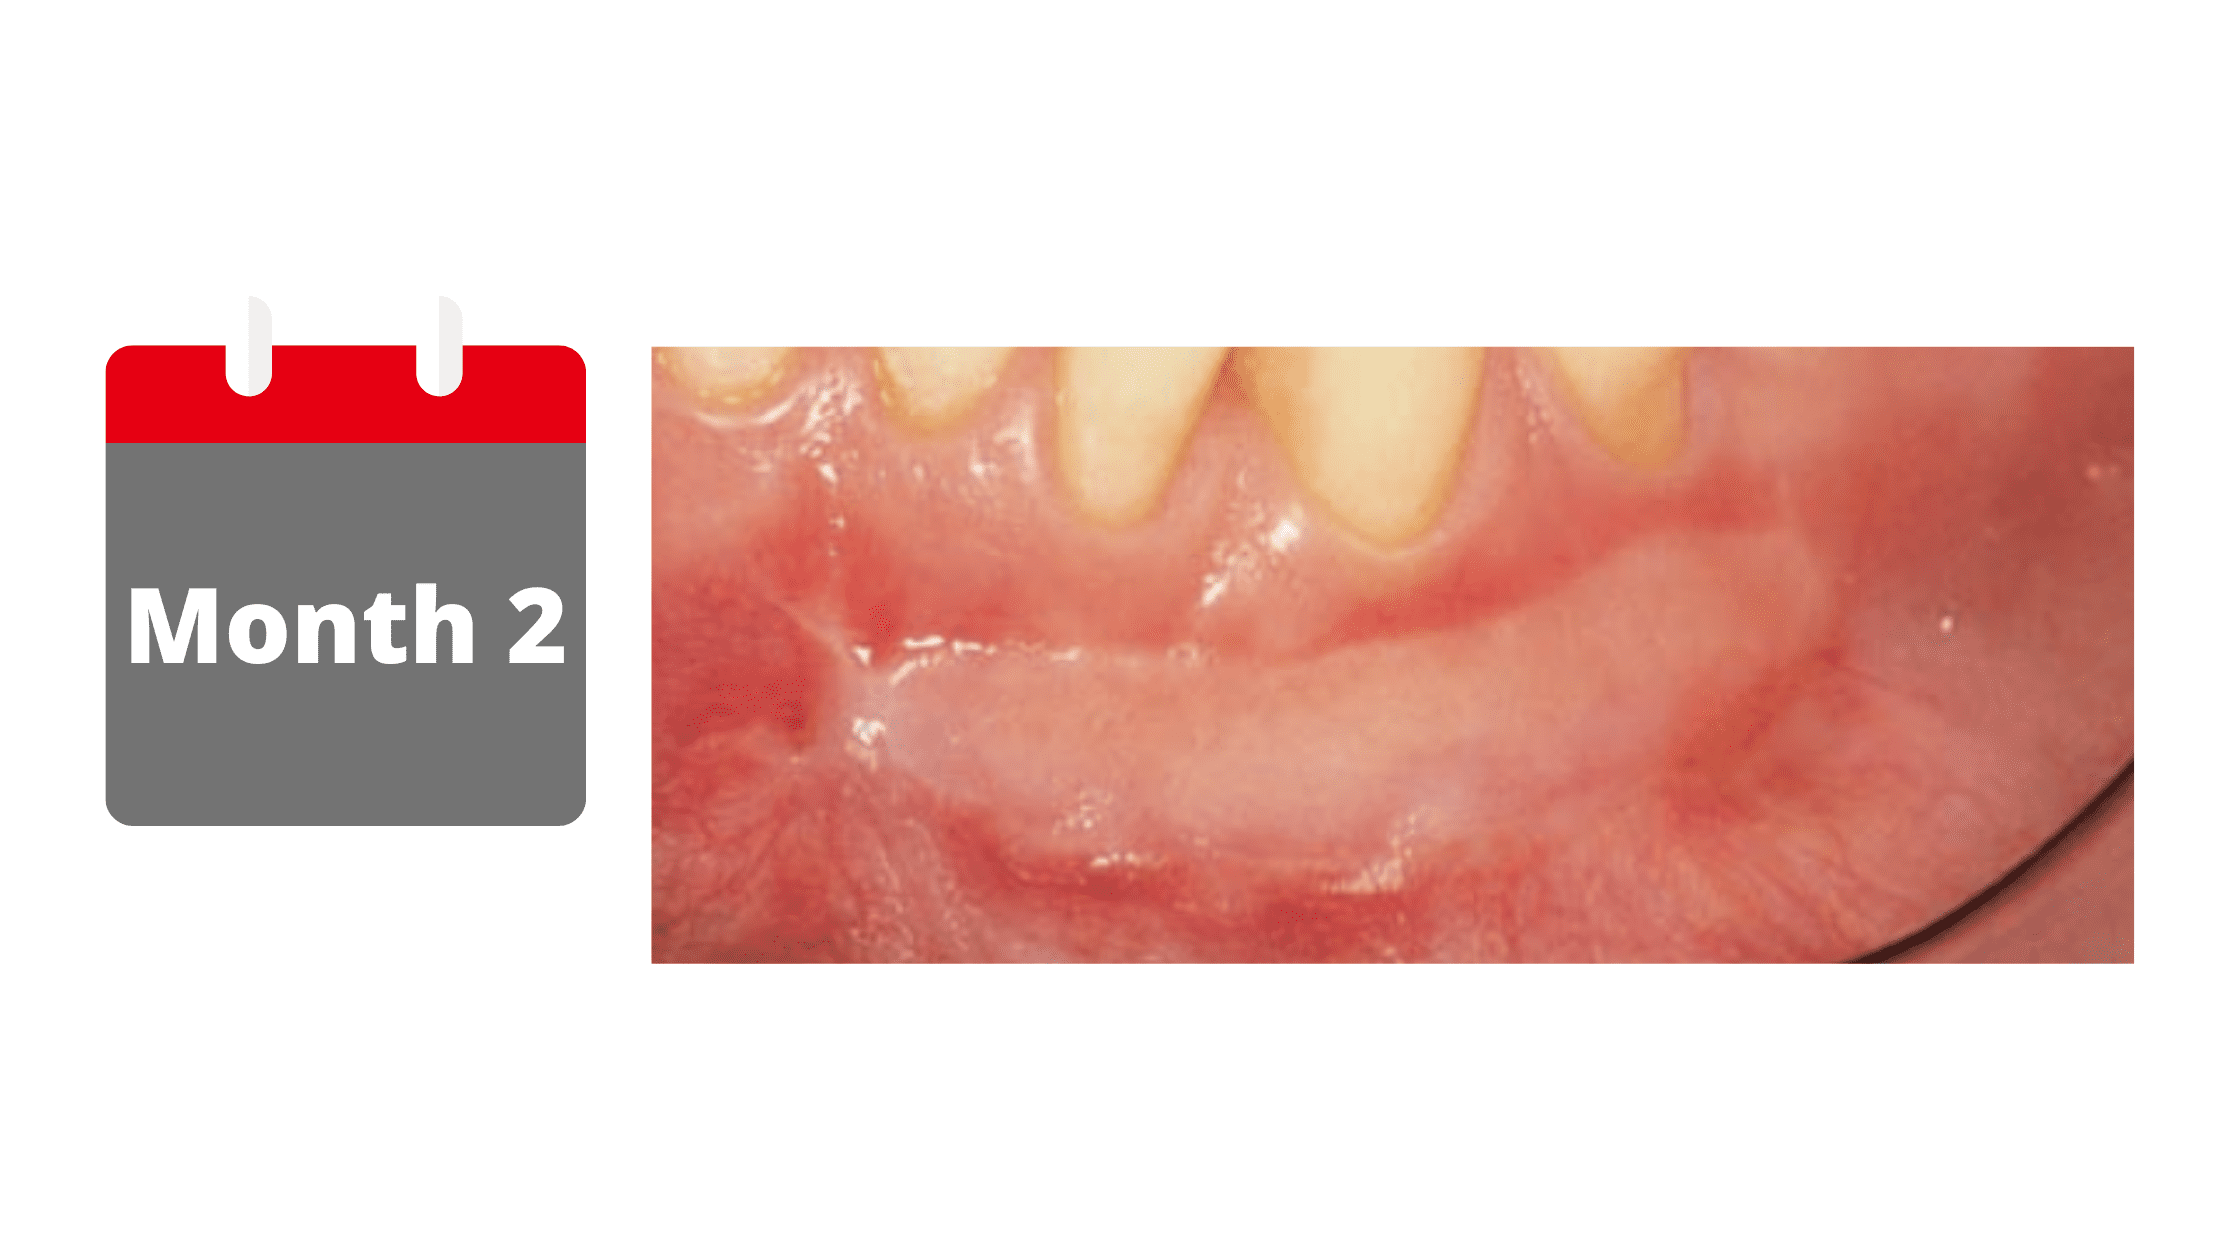 The fourth stage of gum graft healing 